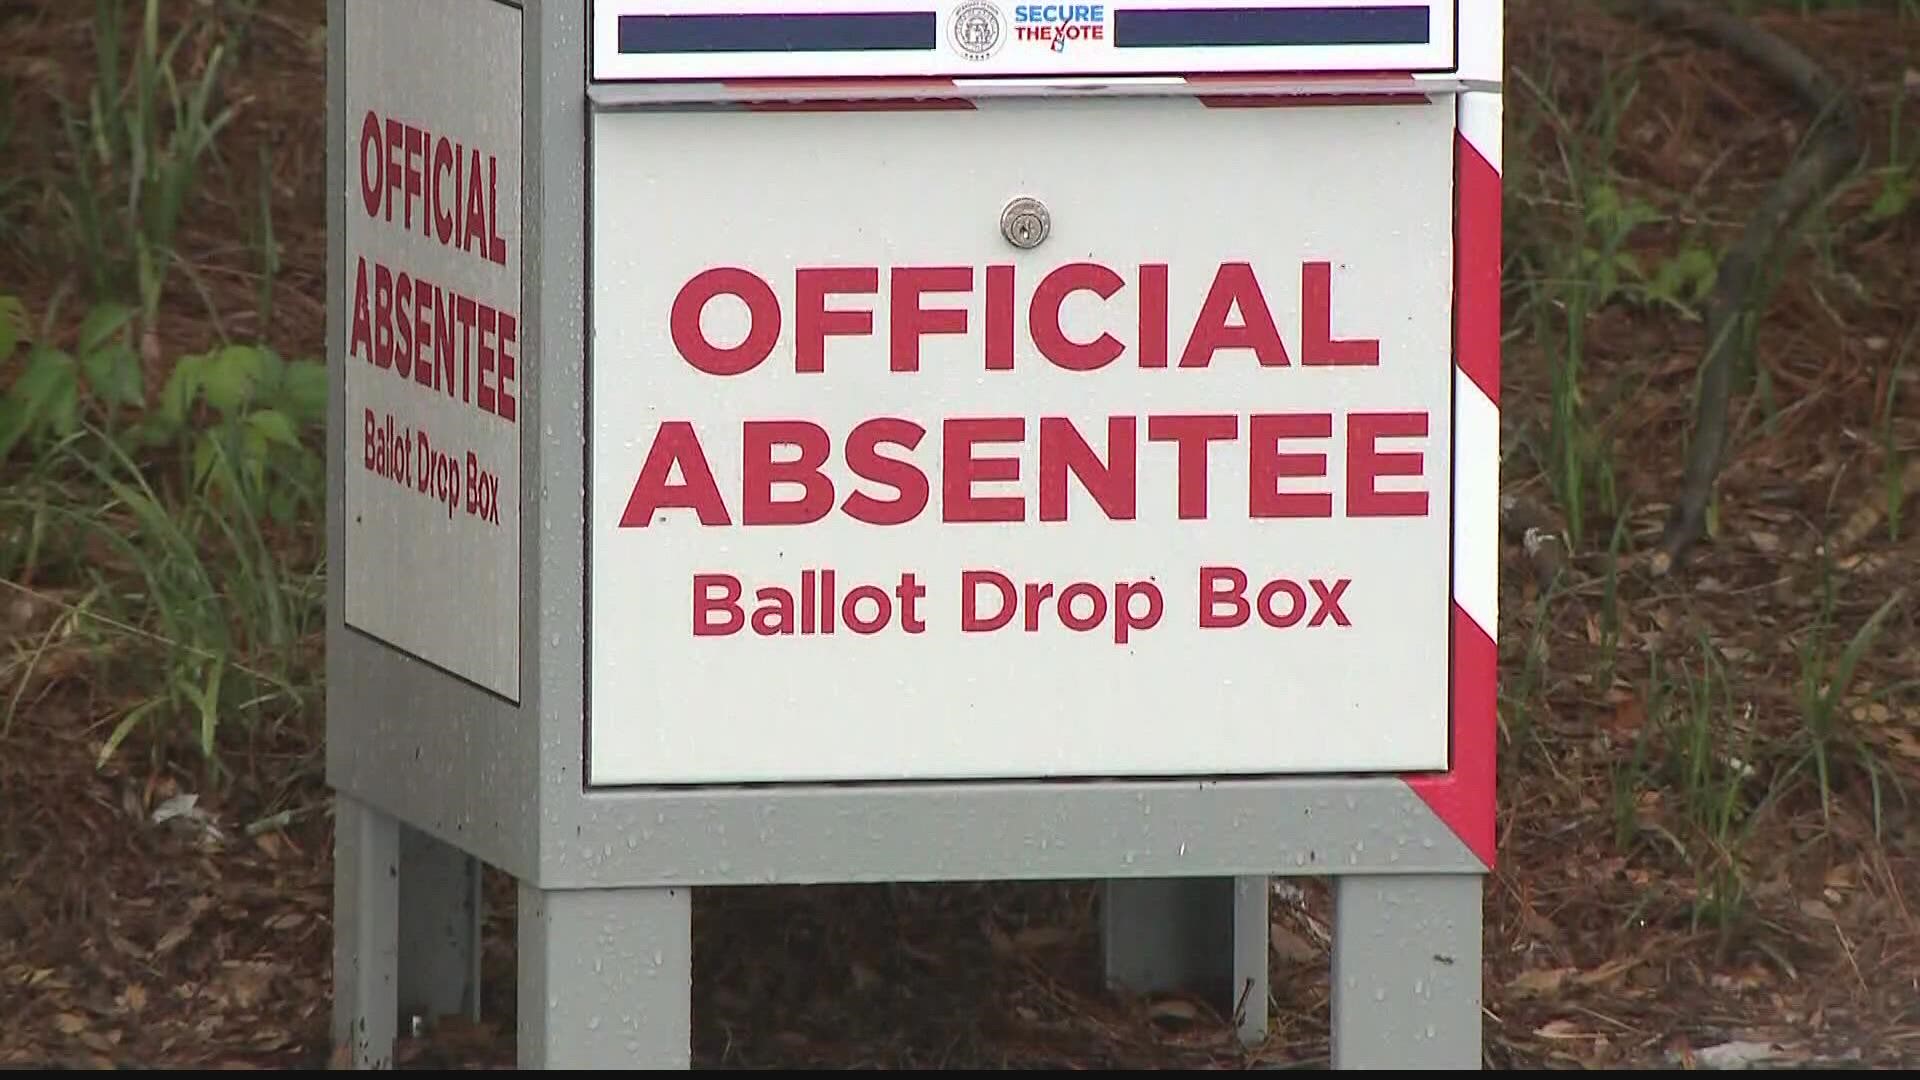 With Georgia's new voter law, absentee ballots are handled differently.